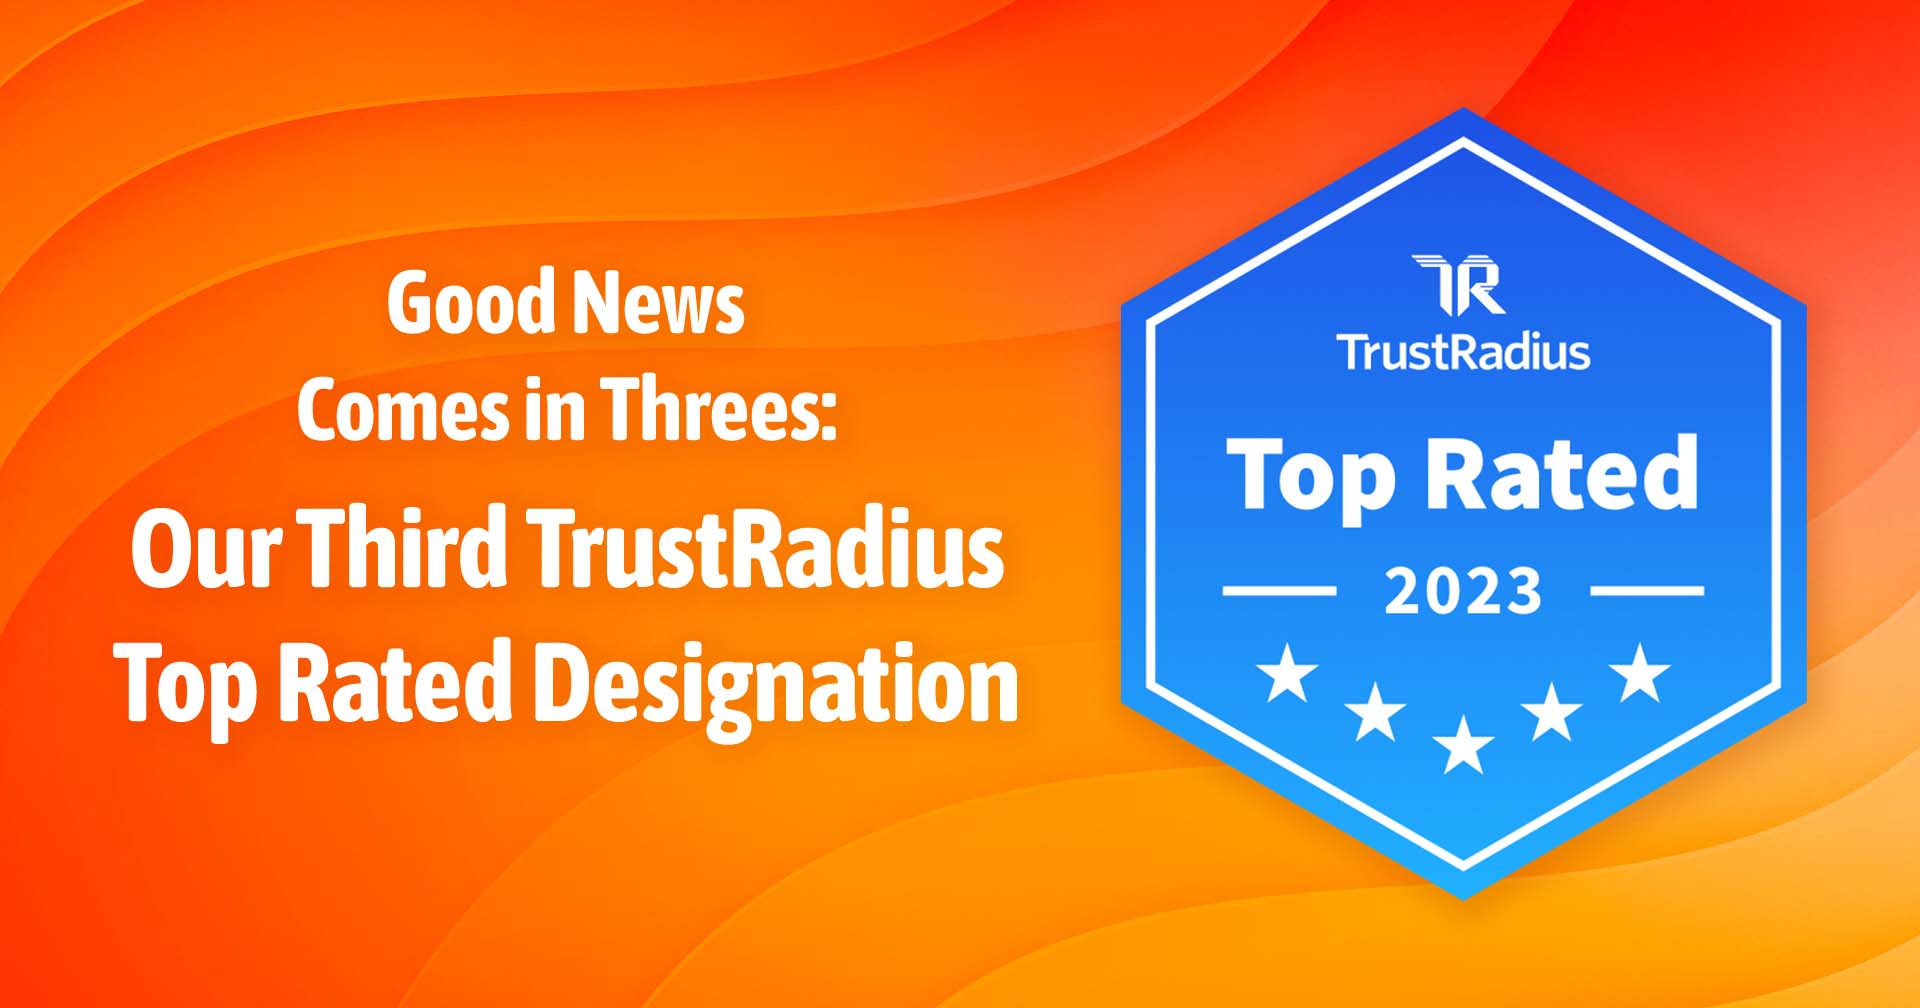 Good News Comes in Threes: Our Third TrustRadius Top Rated Designation